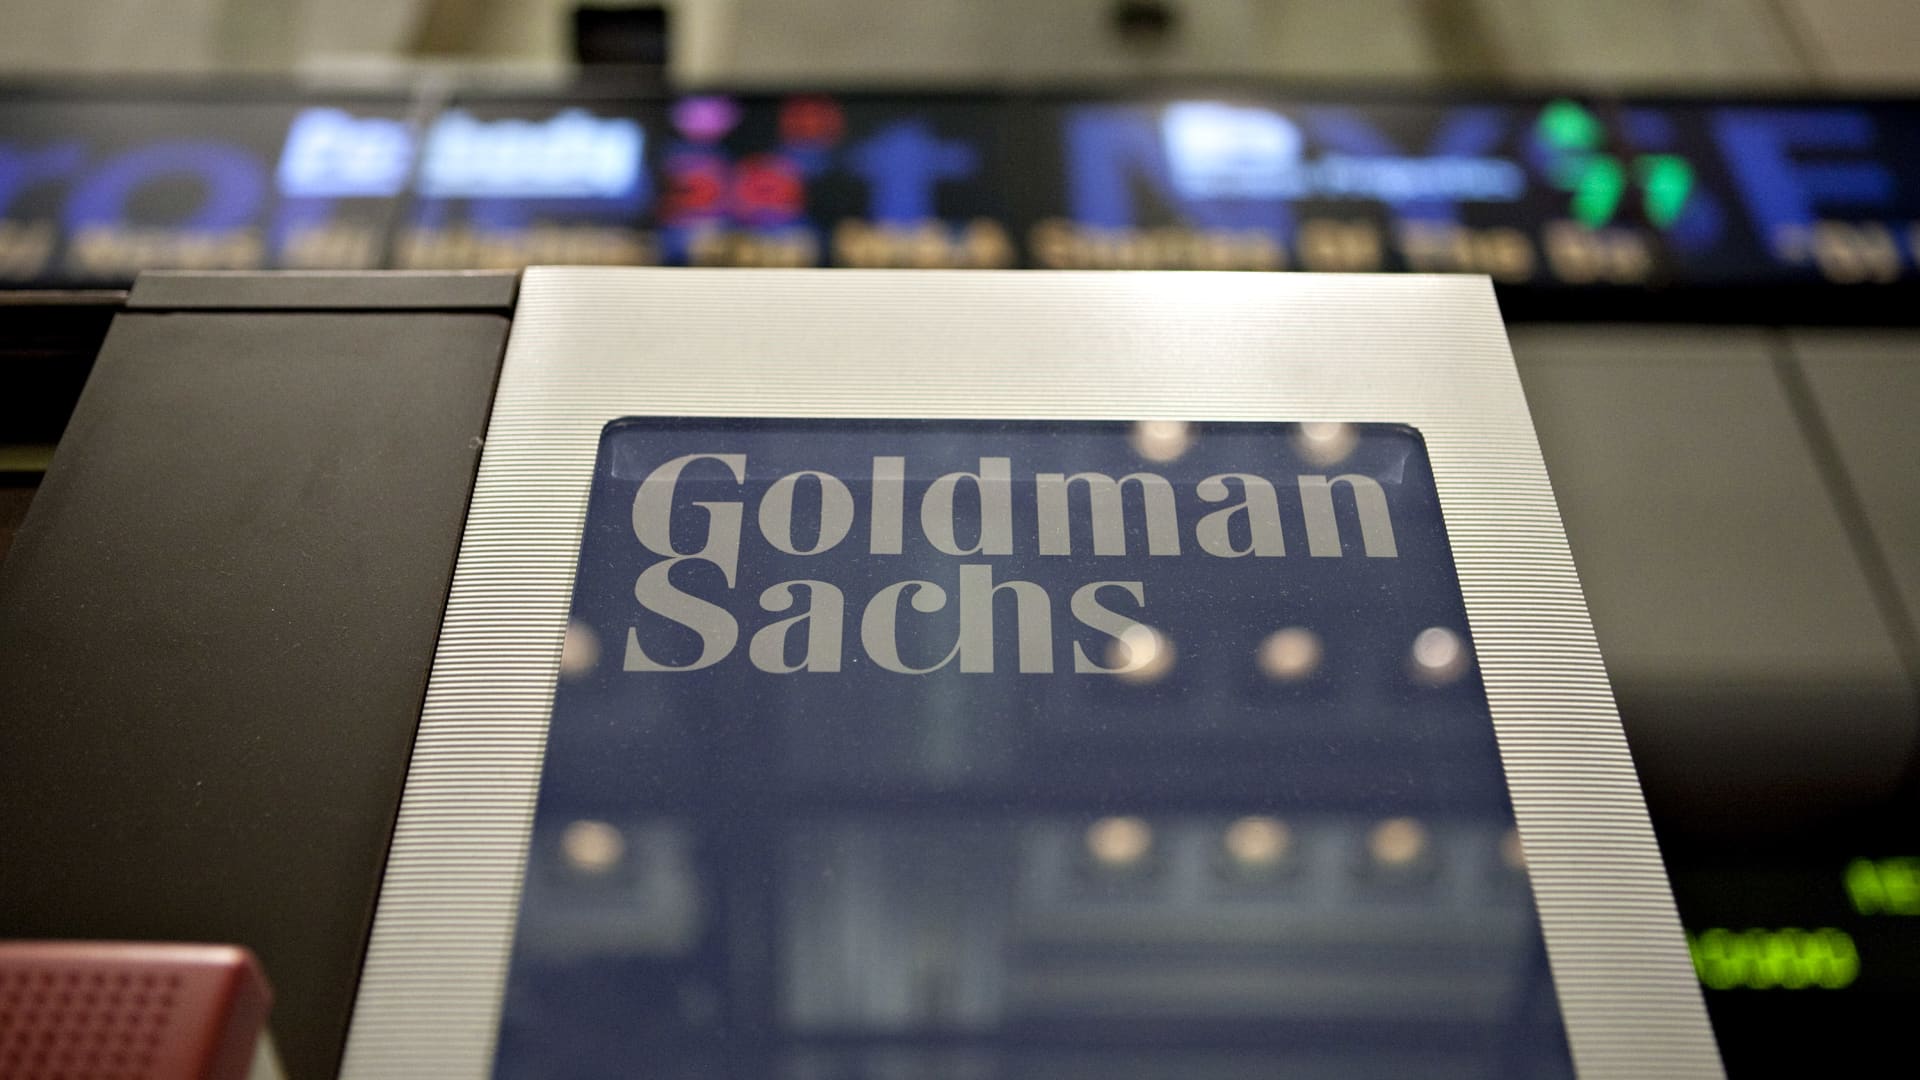 Goldman Sachs unveils crypto classification system, aimed at institutional investors